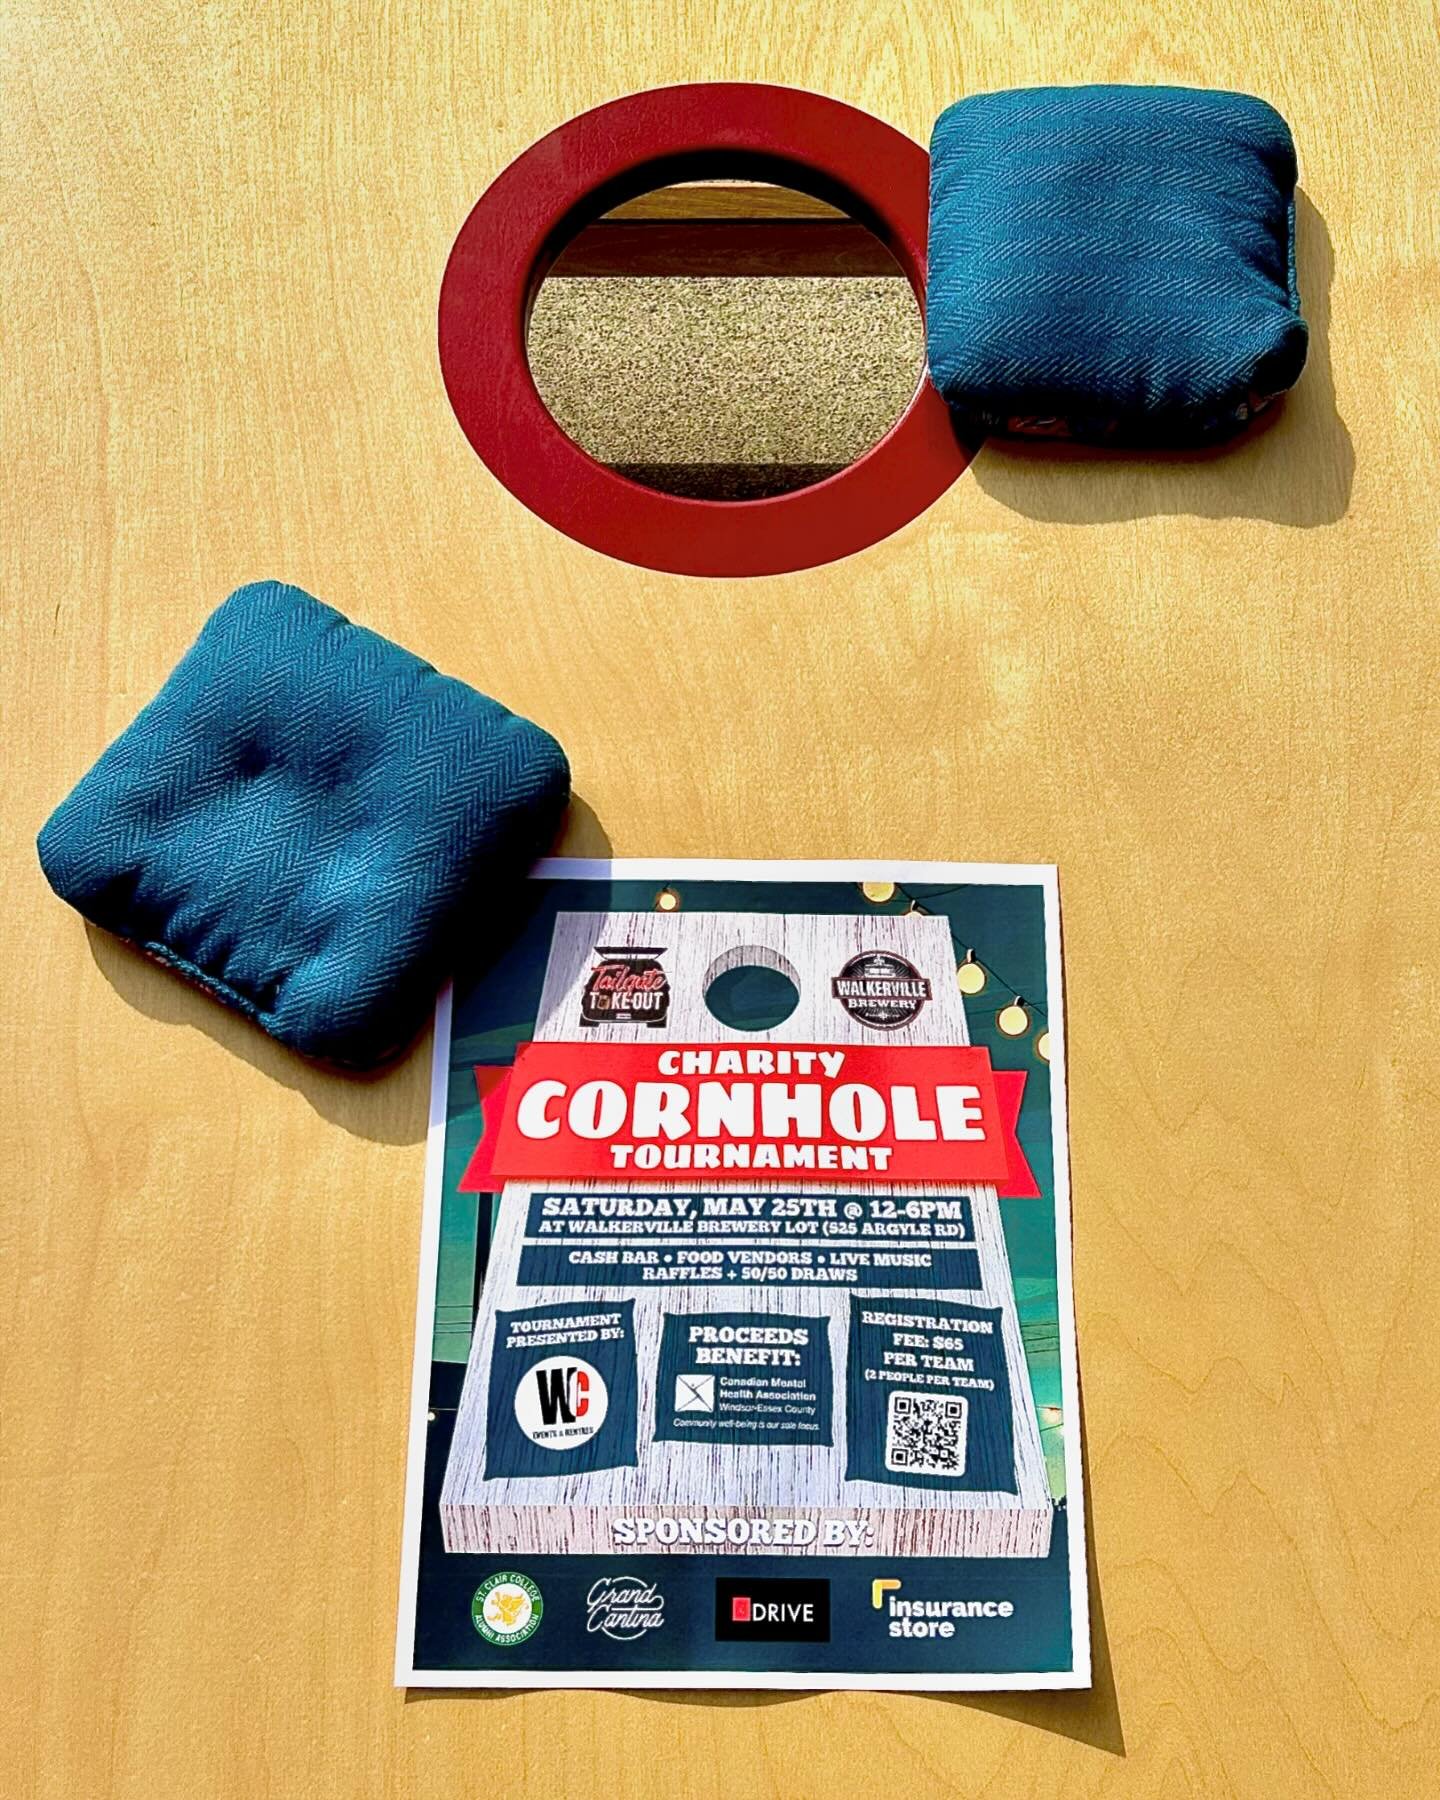 IT&rsquo;S BACK!

We&rsquo;ve teamed up with @thetailgatetakeout and @windsorcornhole to host the 2nd Annual Tailgate Takeout Charity Cornhole Tournament on Saturday, May 25th from 12pm to 6pm.

This year proceeds from the event will support the @cmh